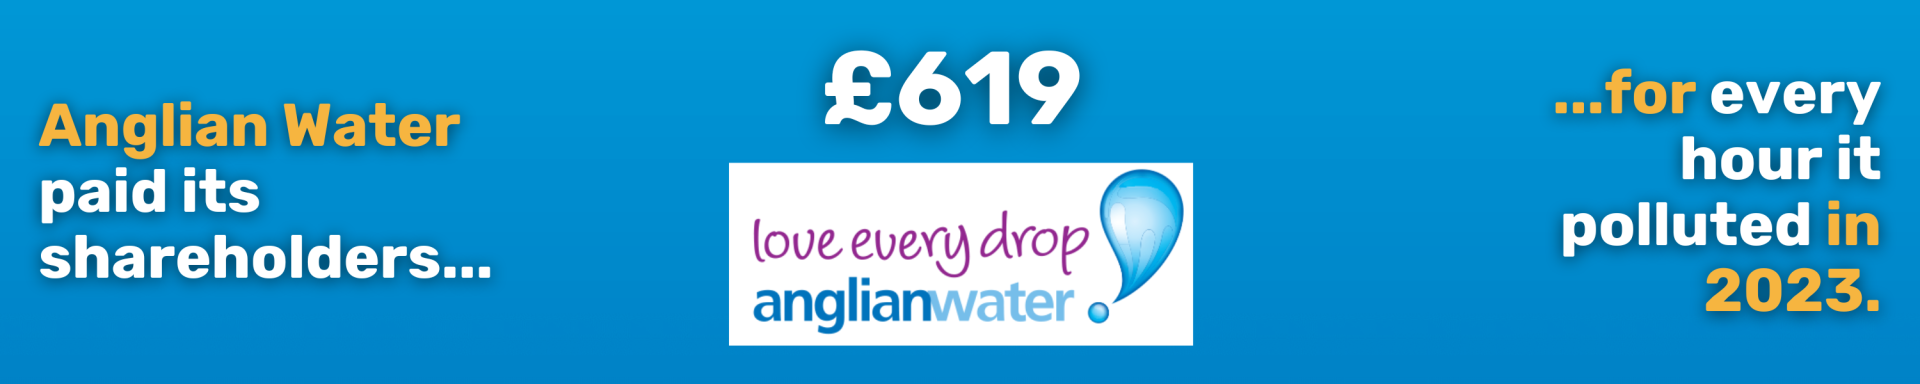 Text reads: "Anglian Water paid its shareholders £619 for every hour it polluted in 2023."